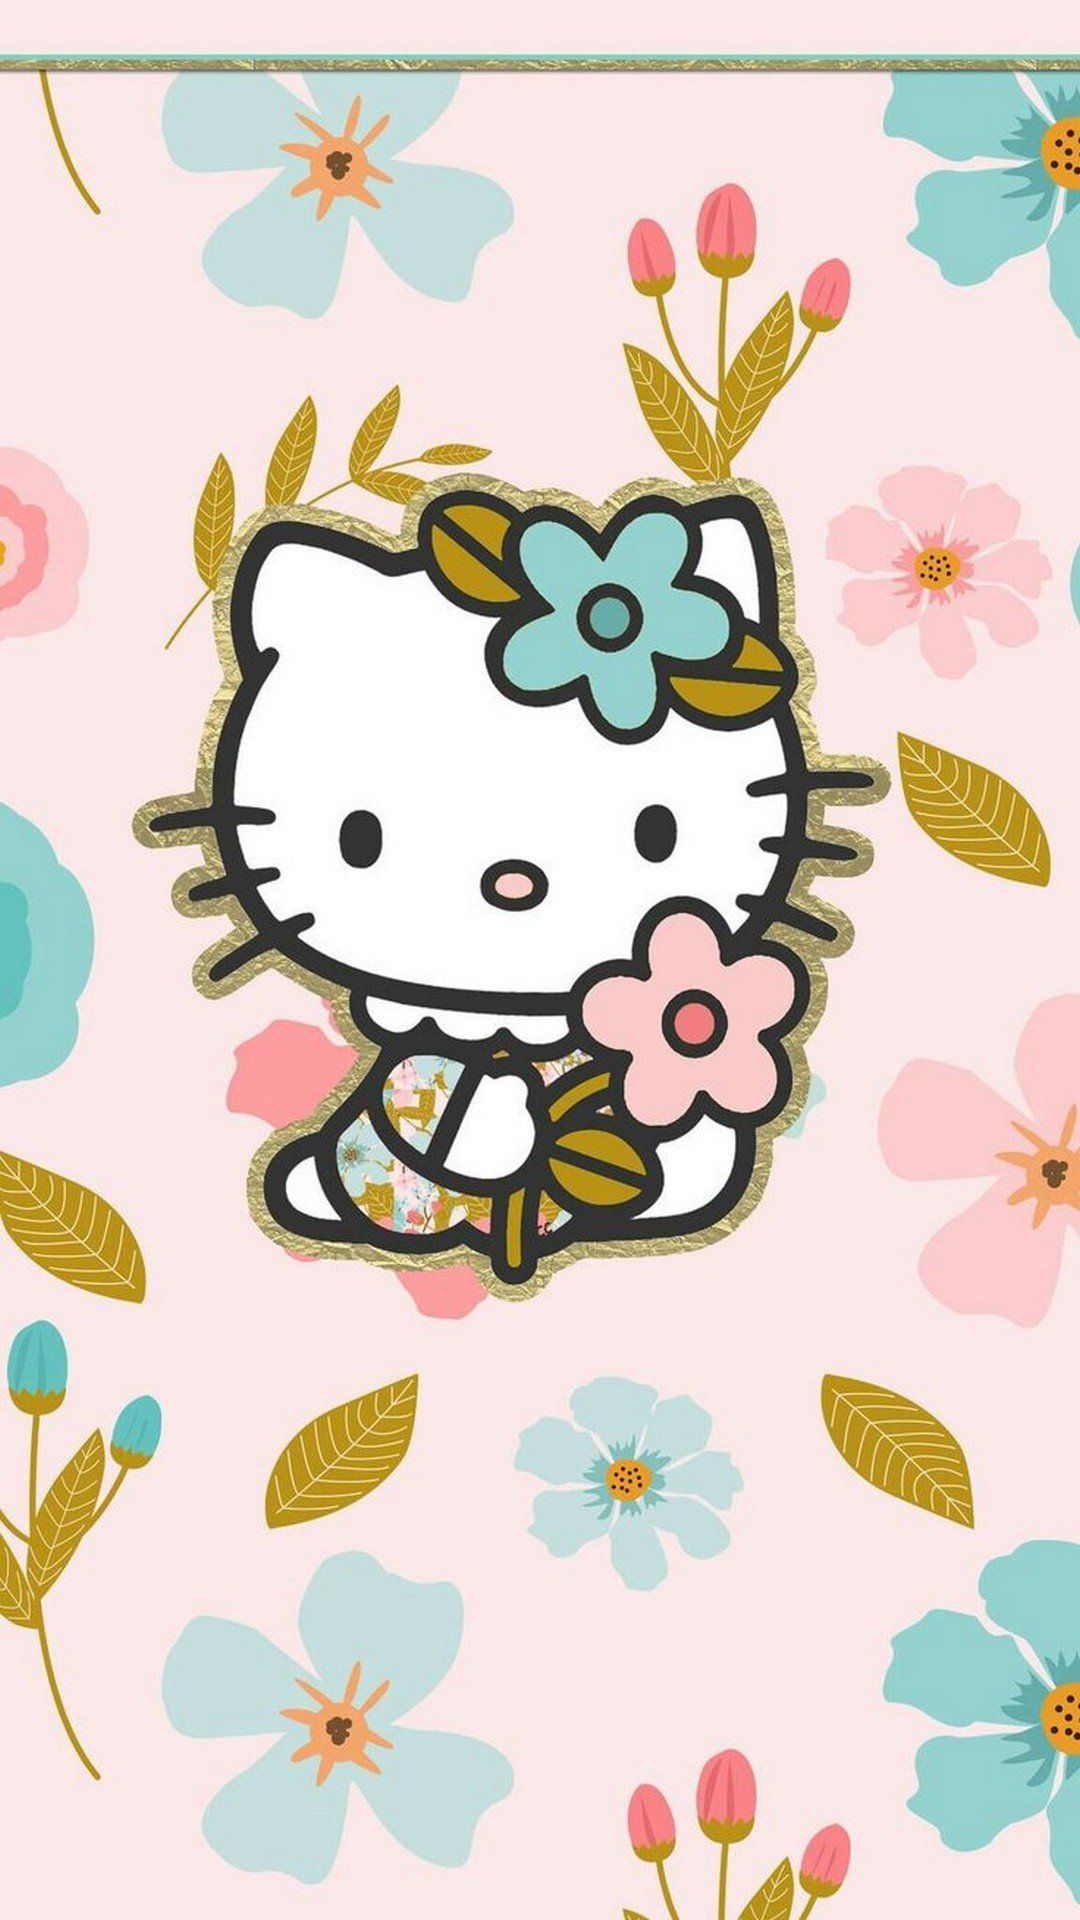 A hello kitty with flowers on it - Hello Kitty